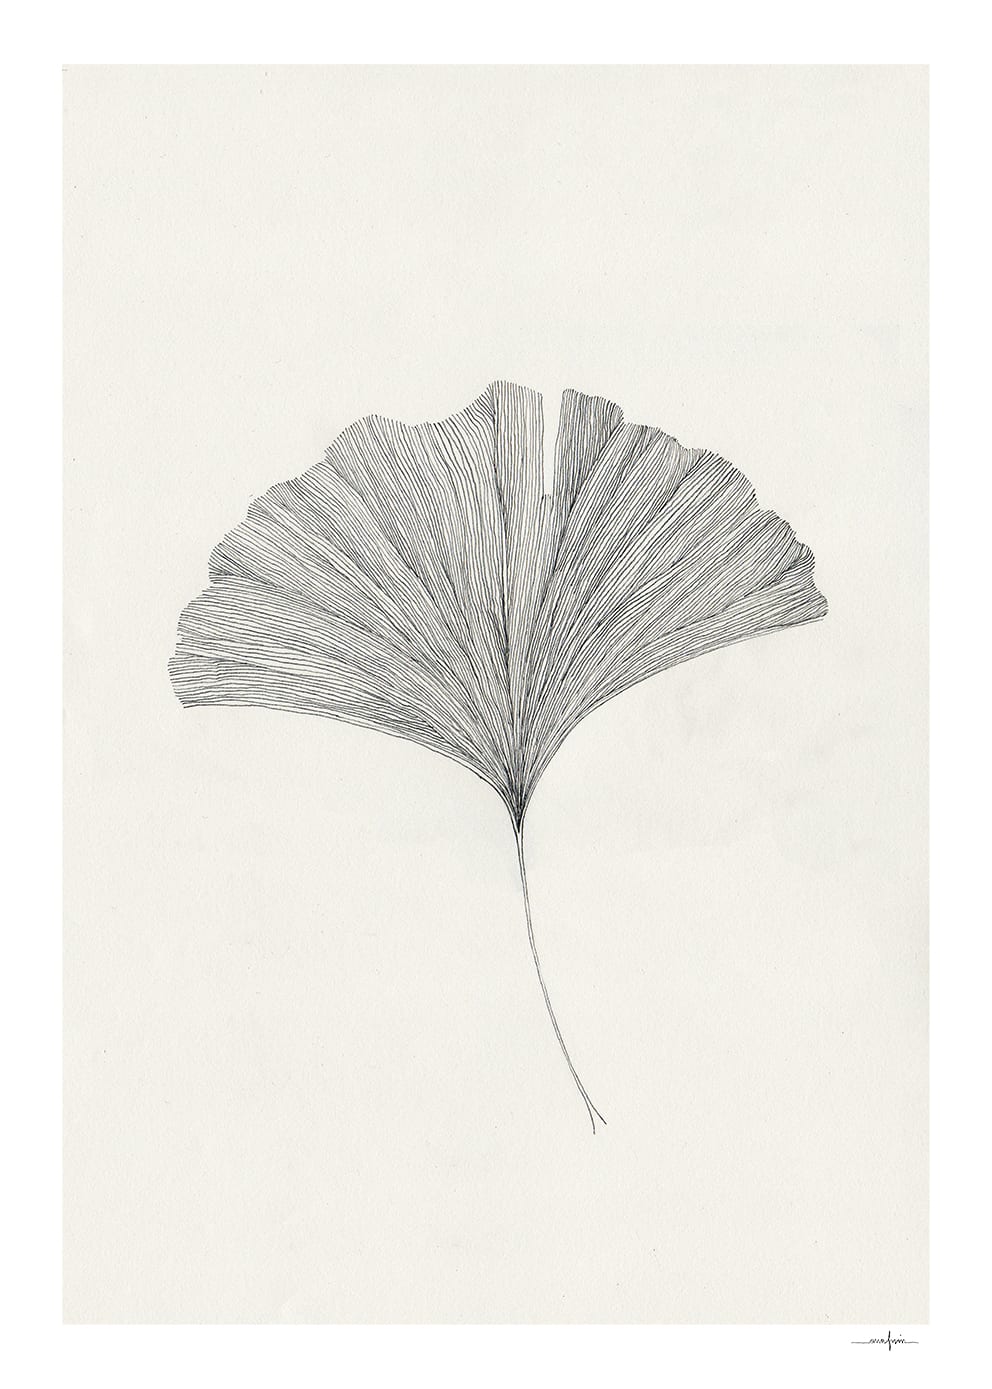 THE POSTER CLUB Poster Πόστερ, Ginkgo Leaf, Ana Frois, (40x50) cm, Μαύρο/Εκρού, Sustainable Paper, THE POSTER CLUB